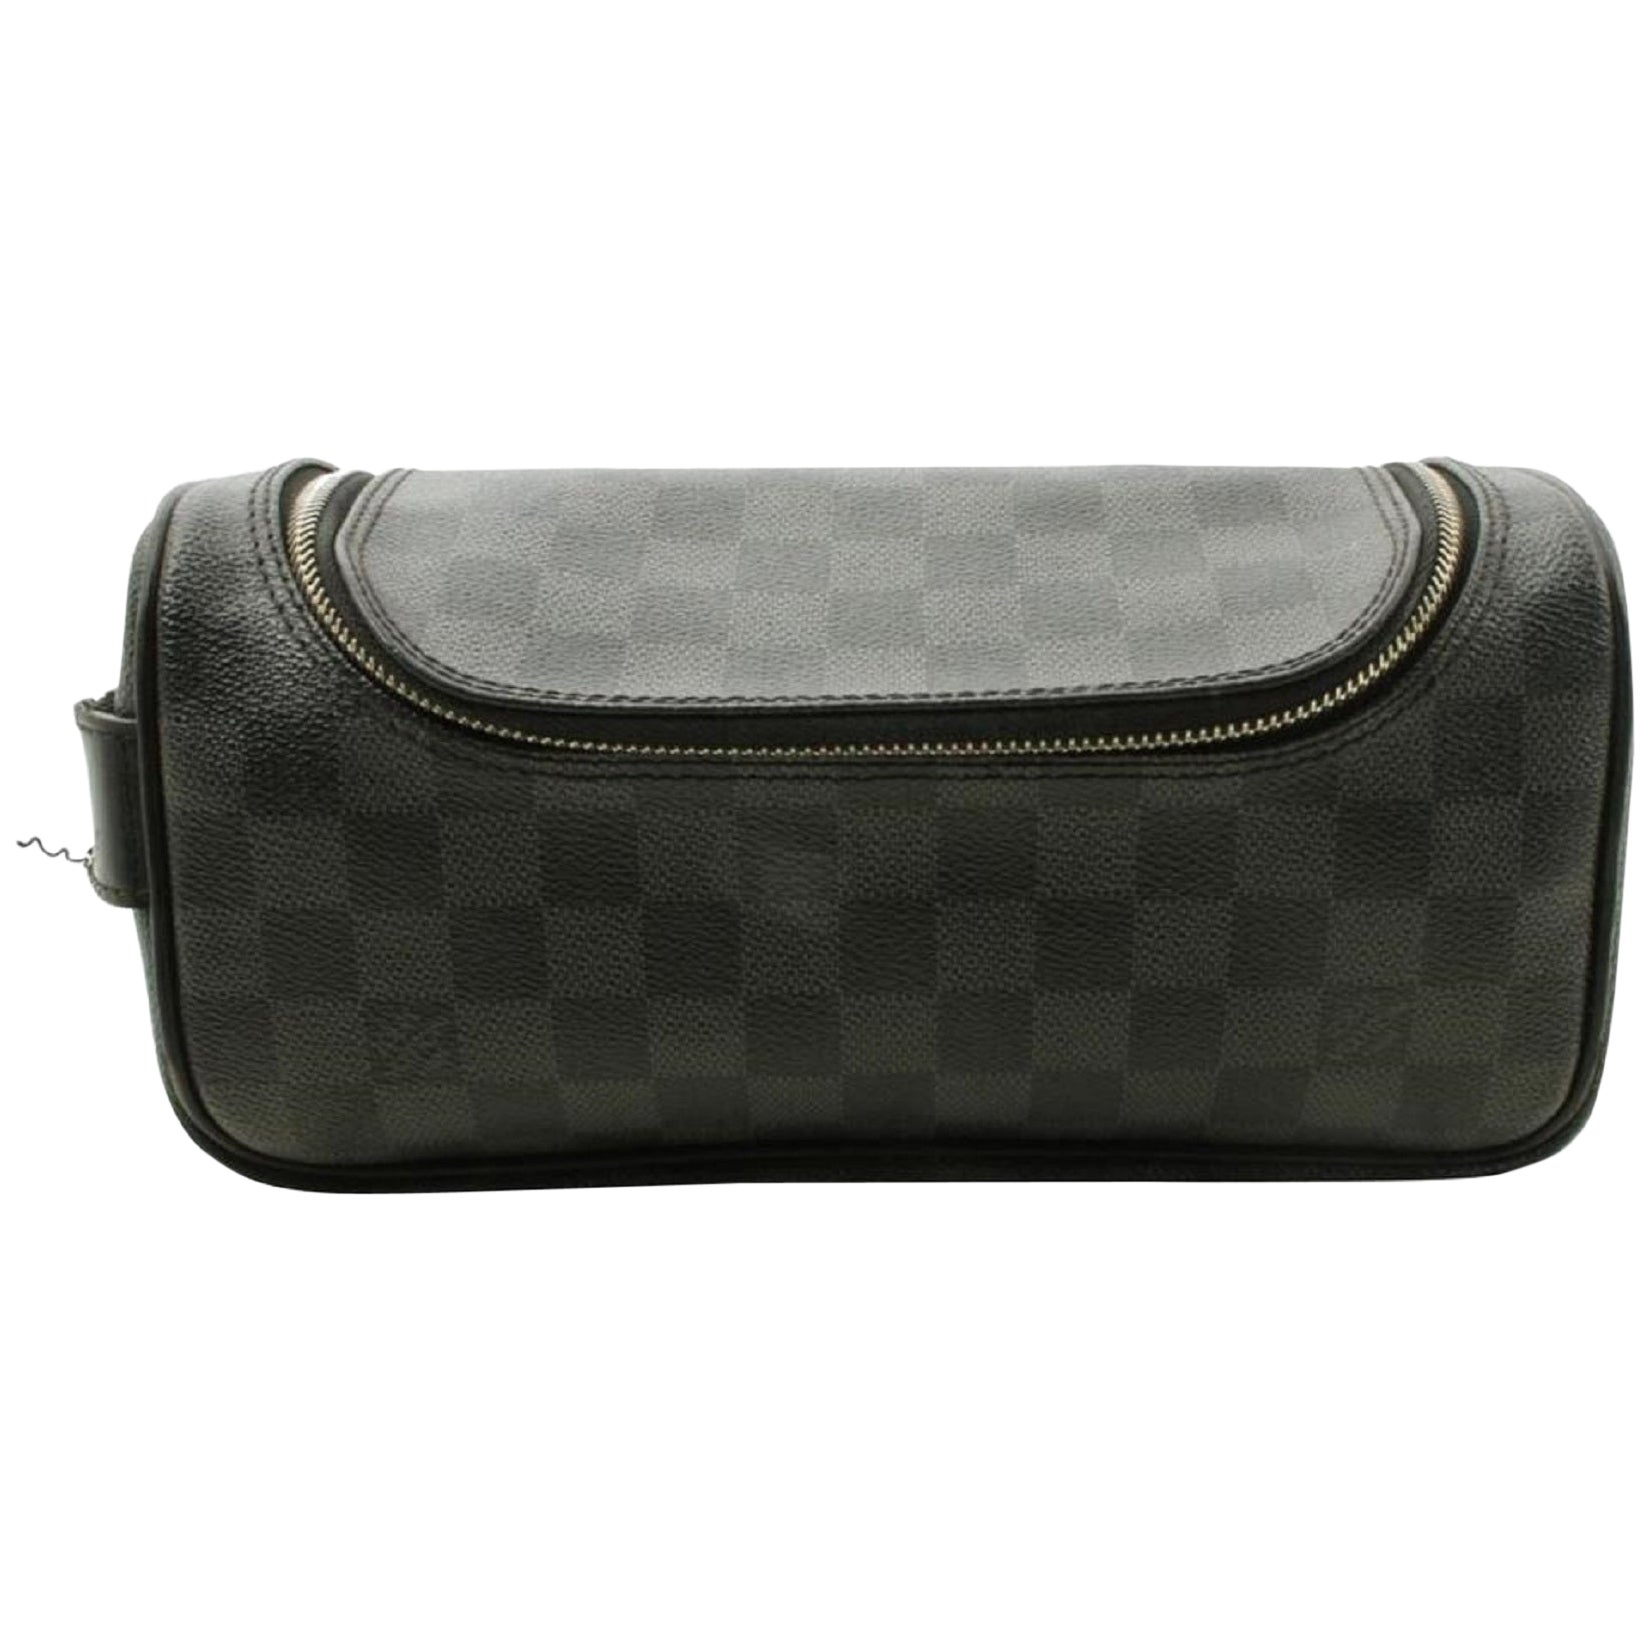 Louis Vuitton Black Damier Graphite Toiletry Pouch Make Up Pouch 862014 For Sale